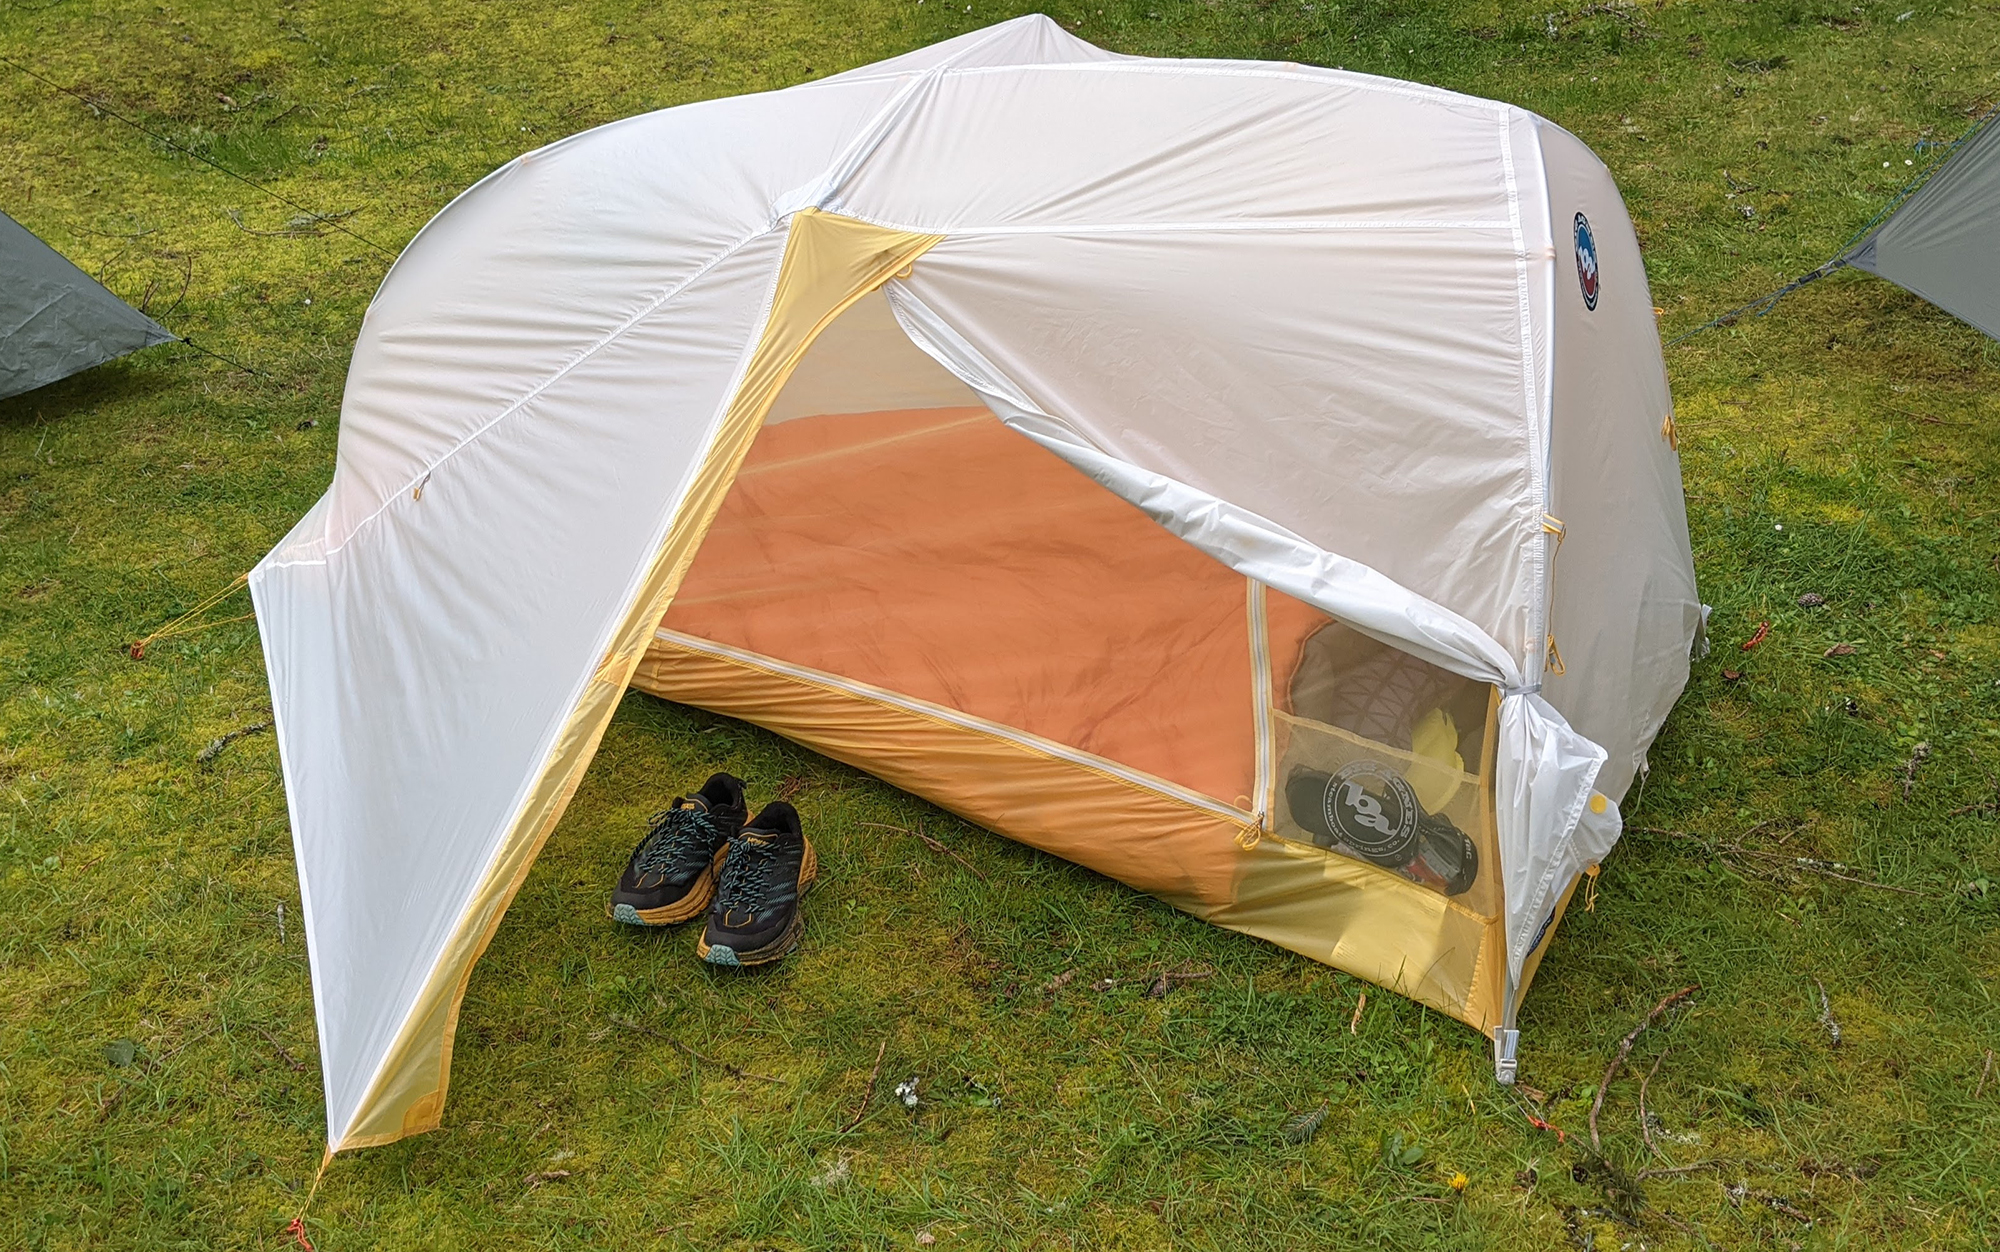 We loved the Big Agnes Tiger Wall UL, even if it’s no longer the lightest of the freestanding options.